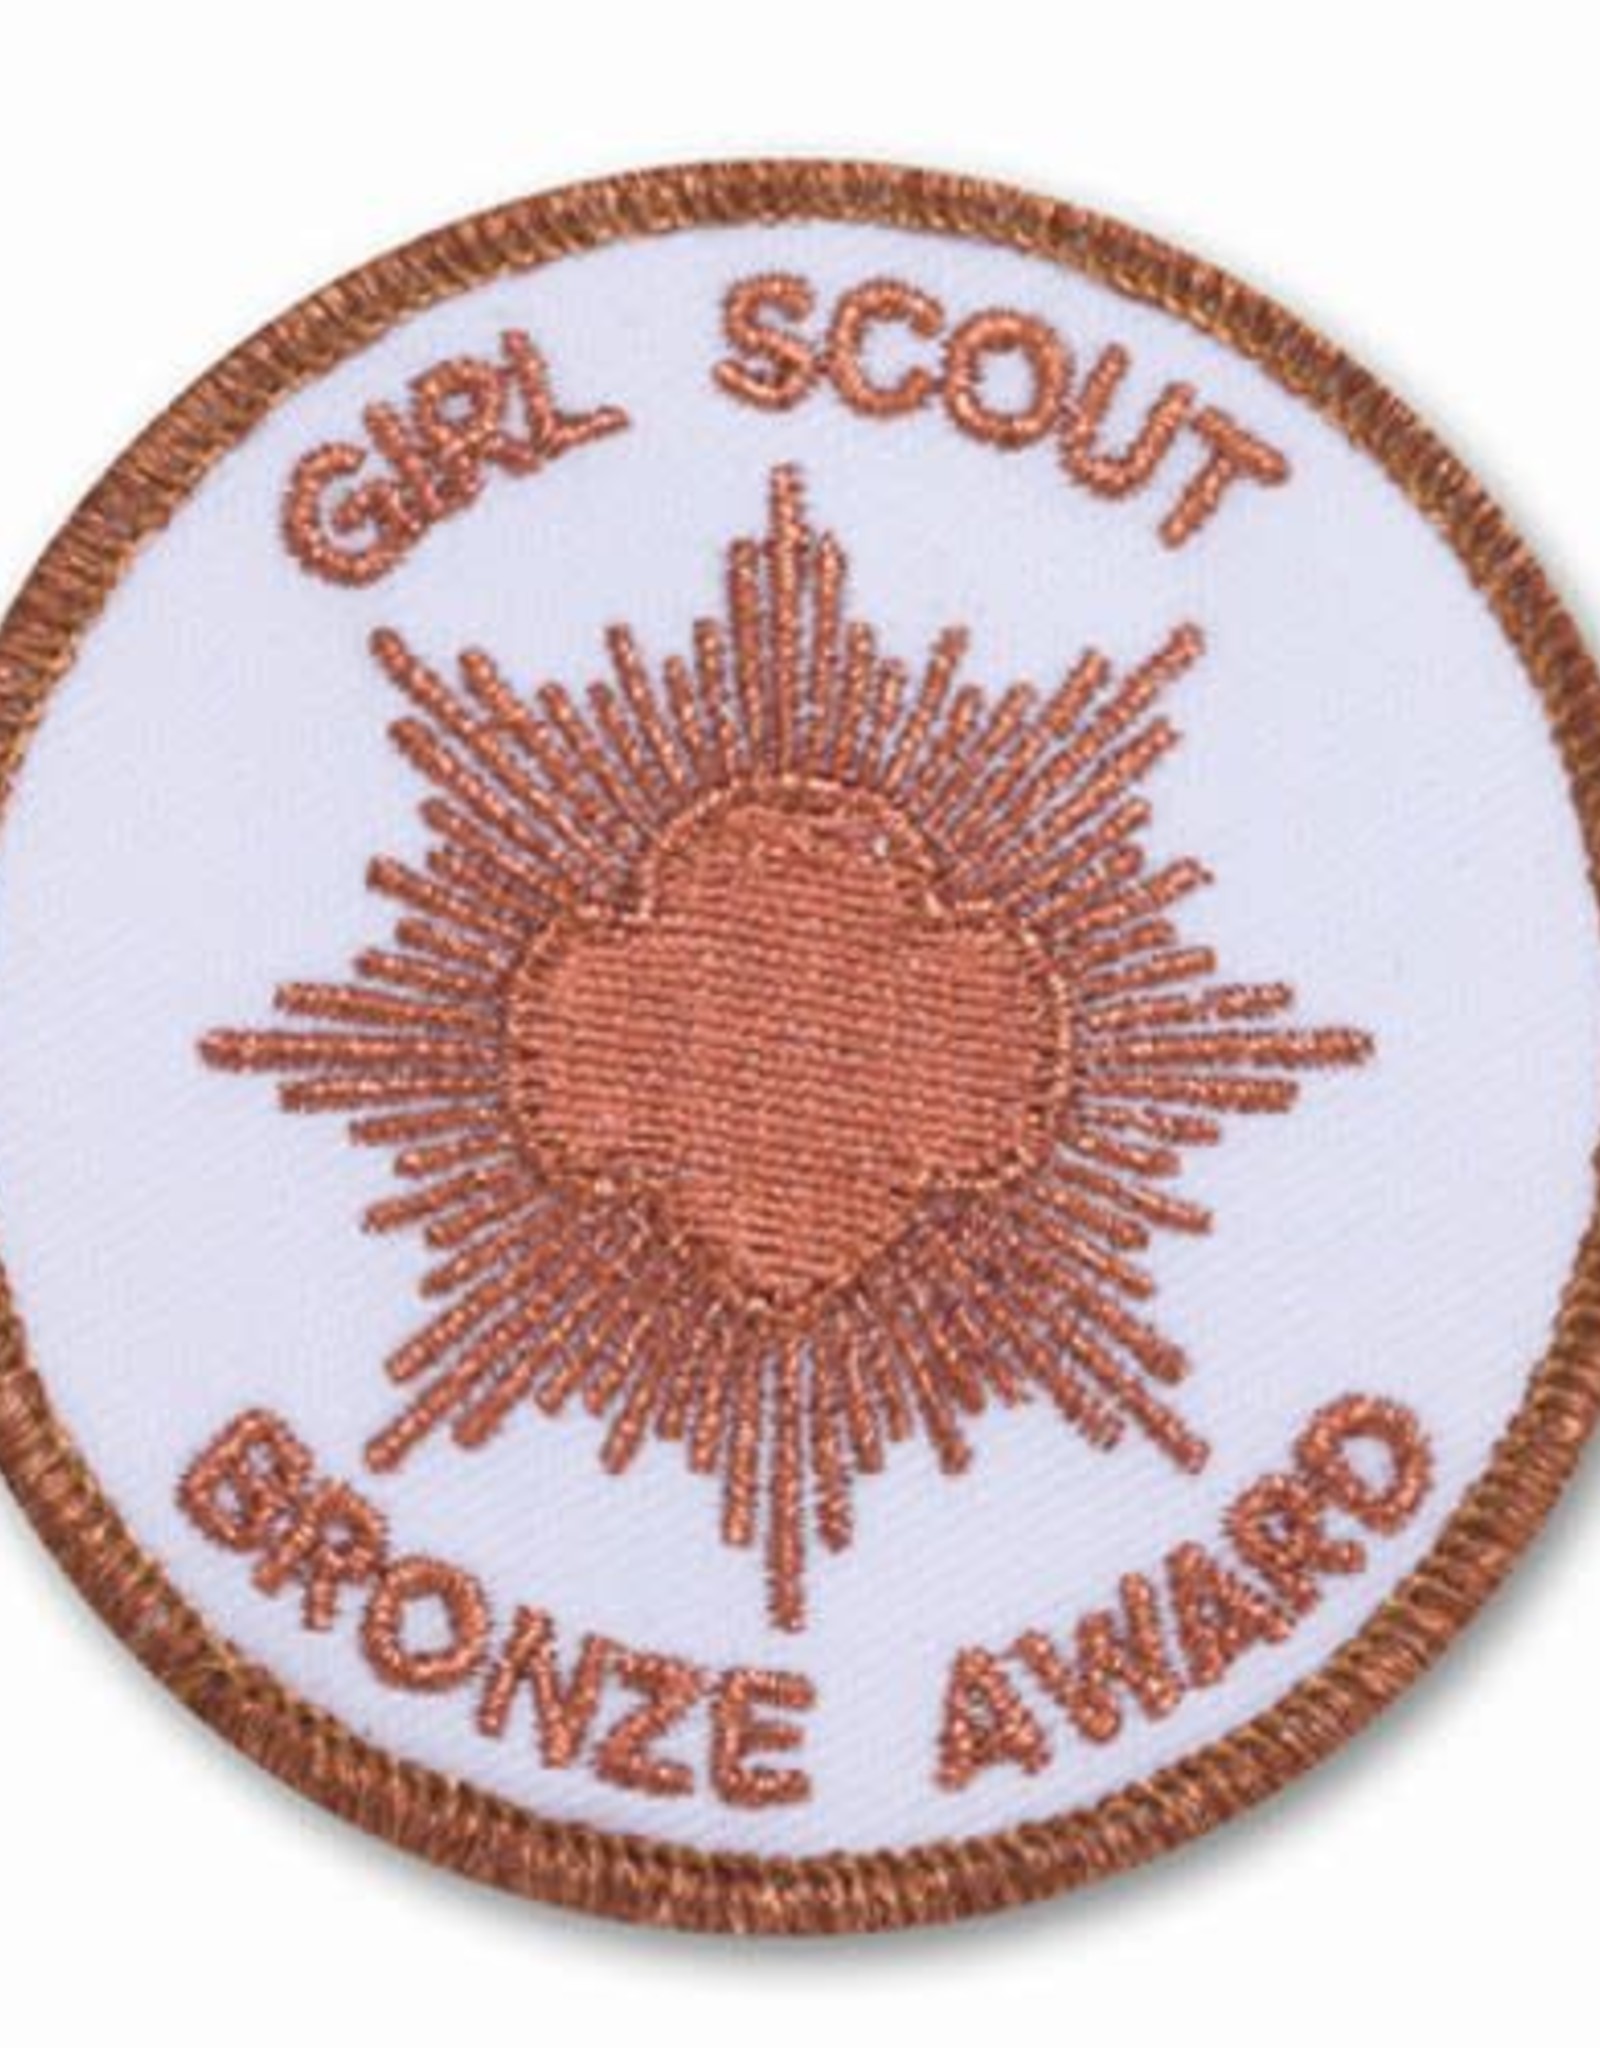 GIRL SCOUTS OF THE USA Bronze Award Emblem Circle Patch